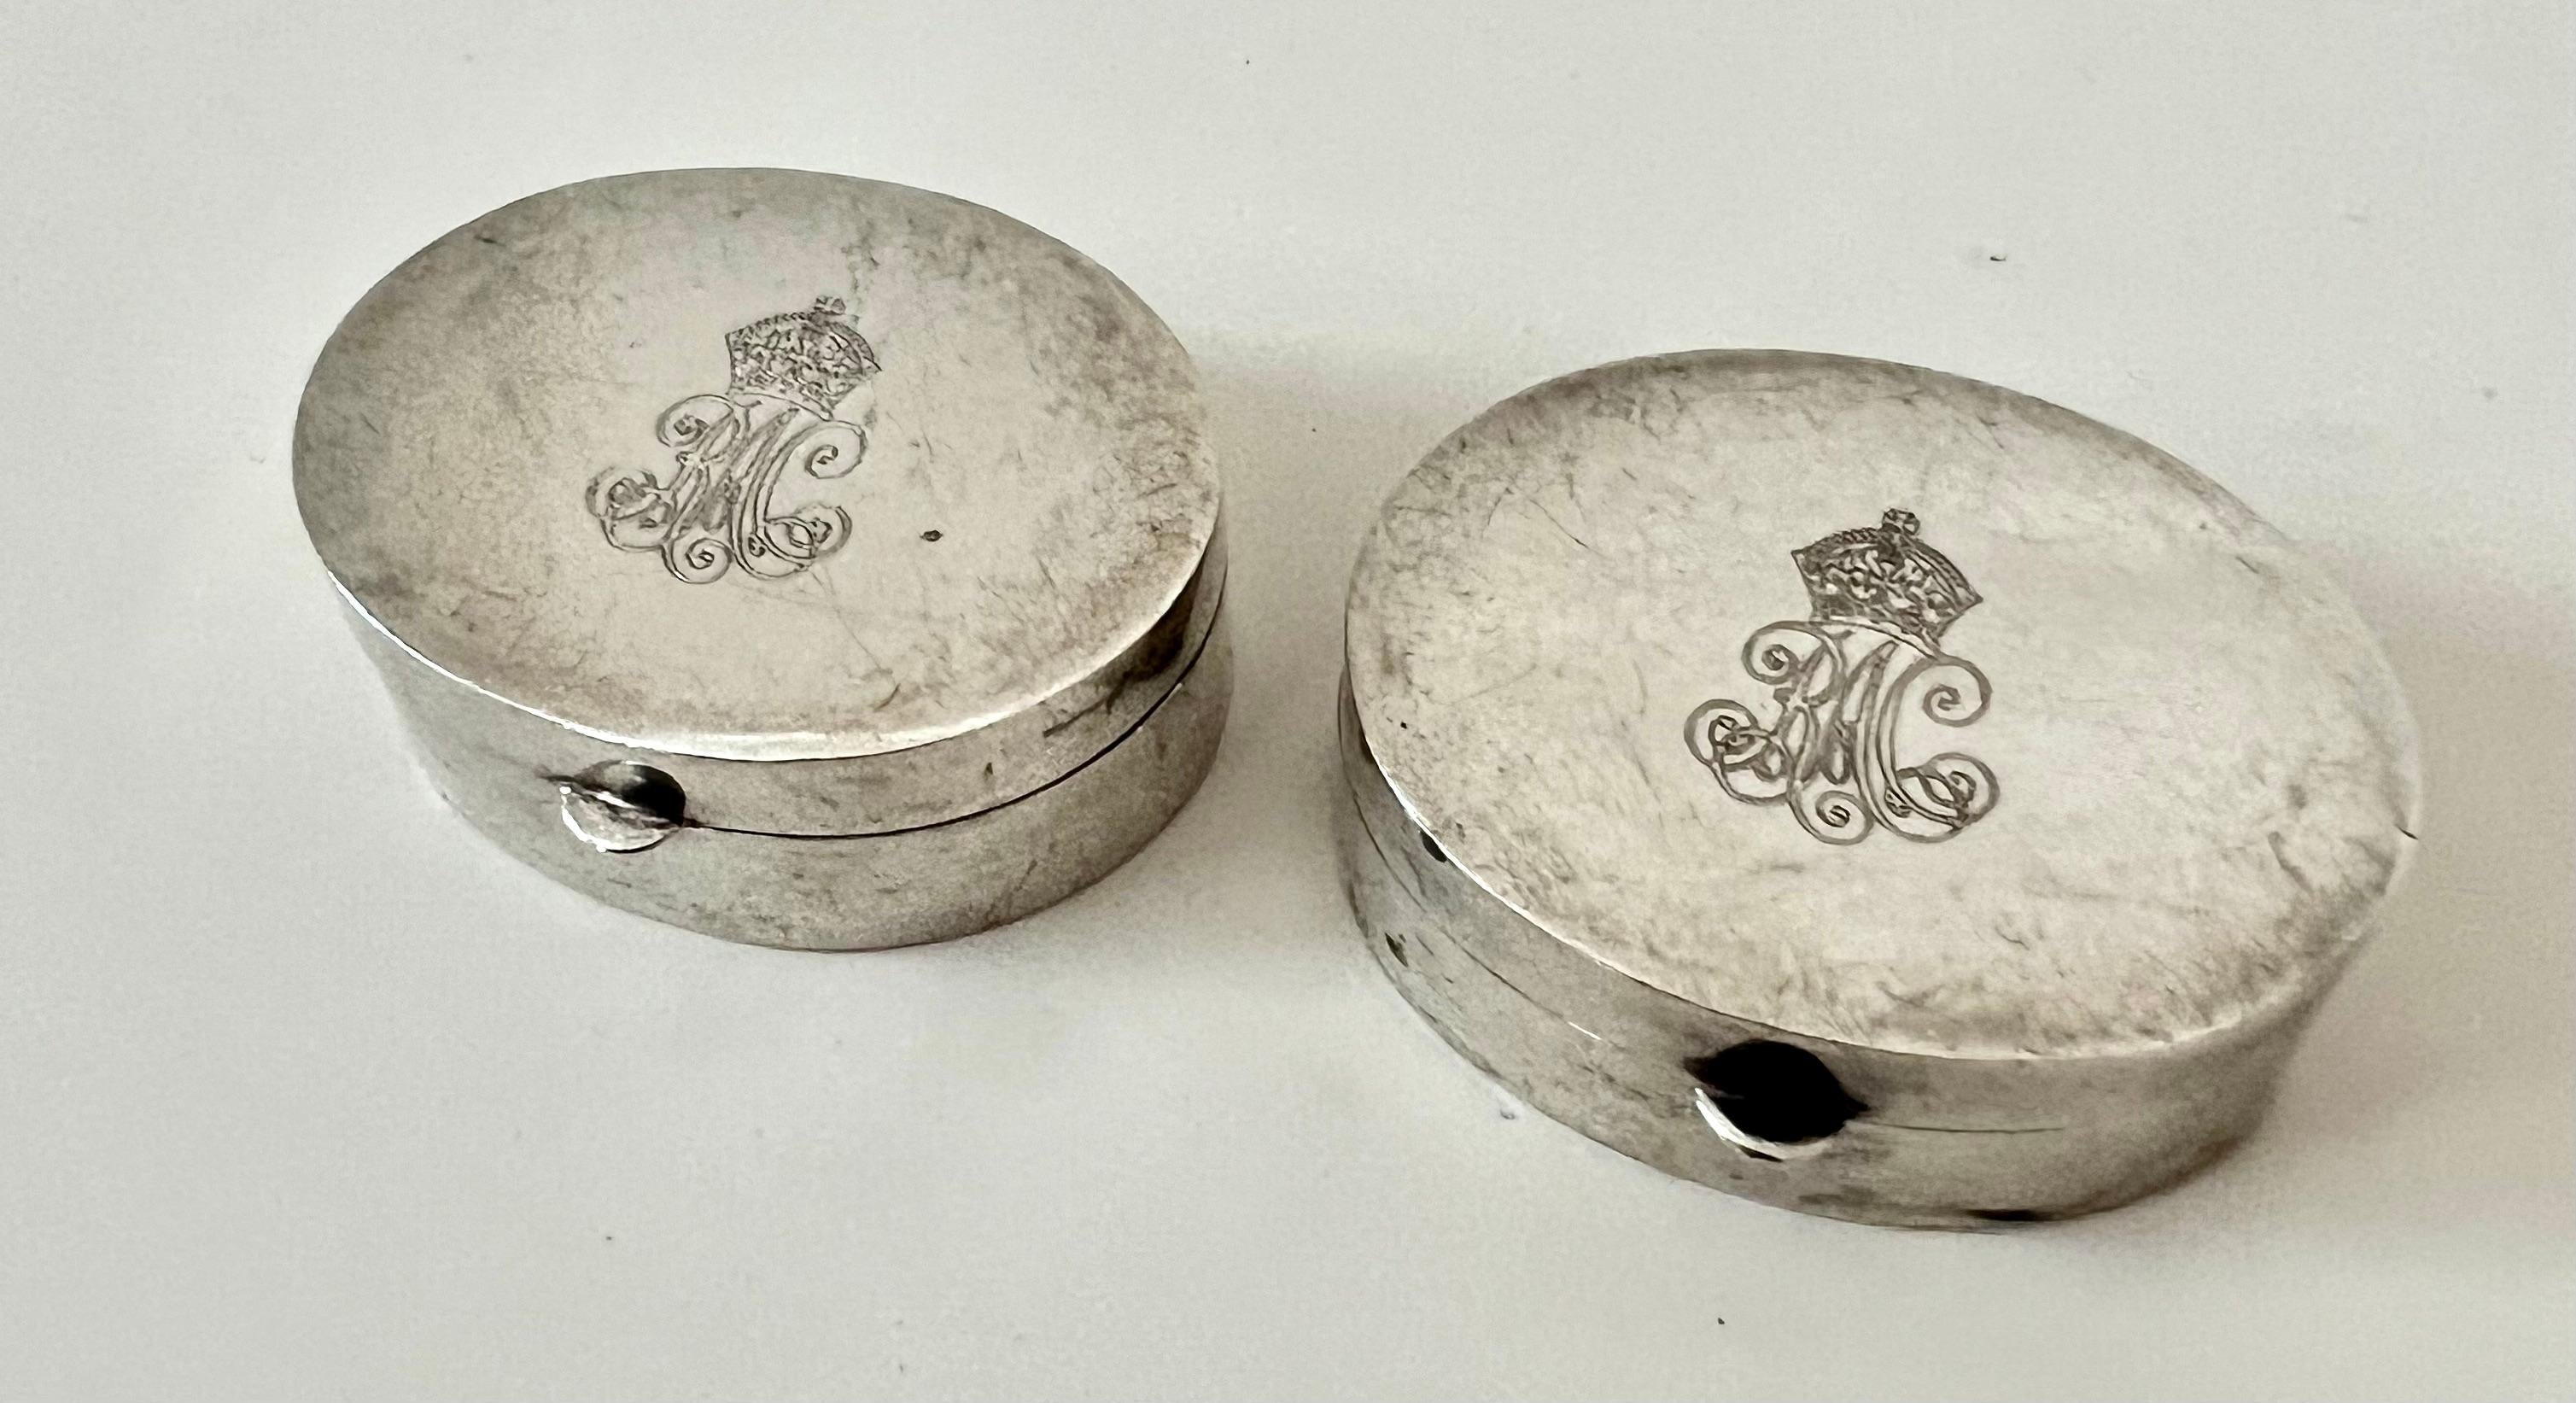 A pair of Sterling Silver Pill boxes.  The pair are in wonderful condition and have a crown with monogram on top.  While the monogram looks to be 